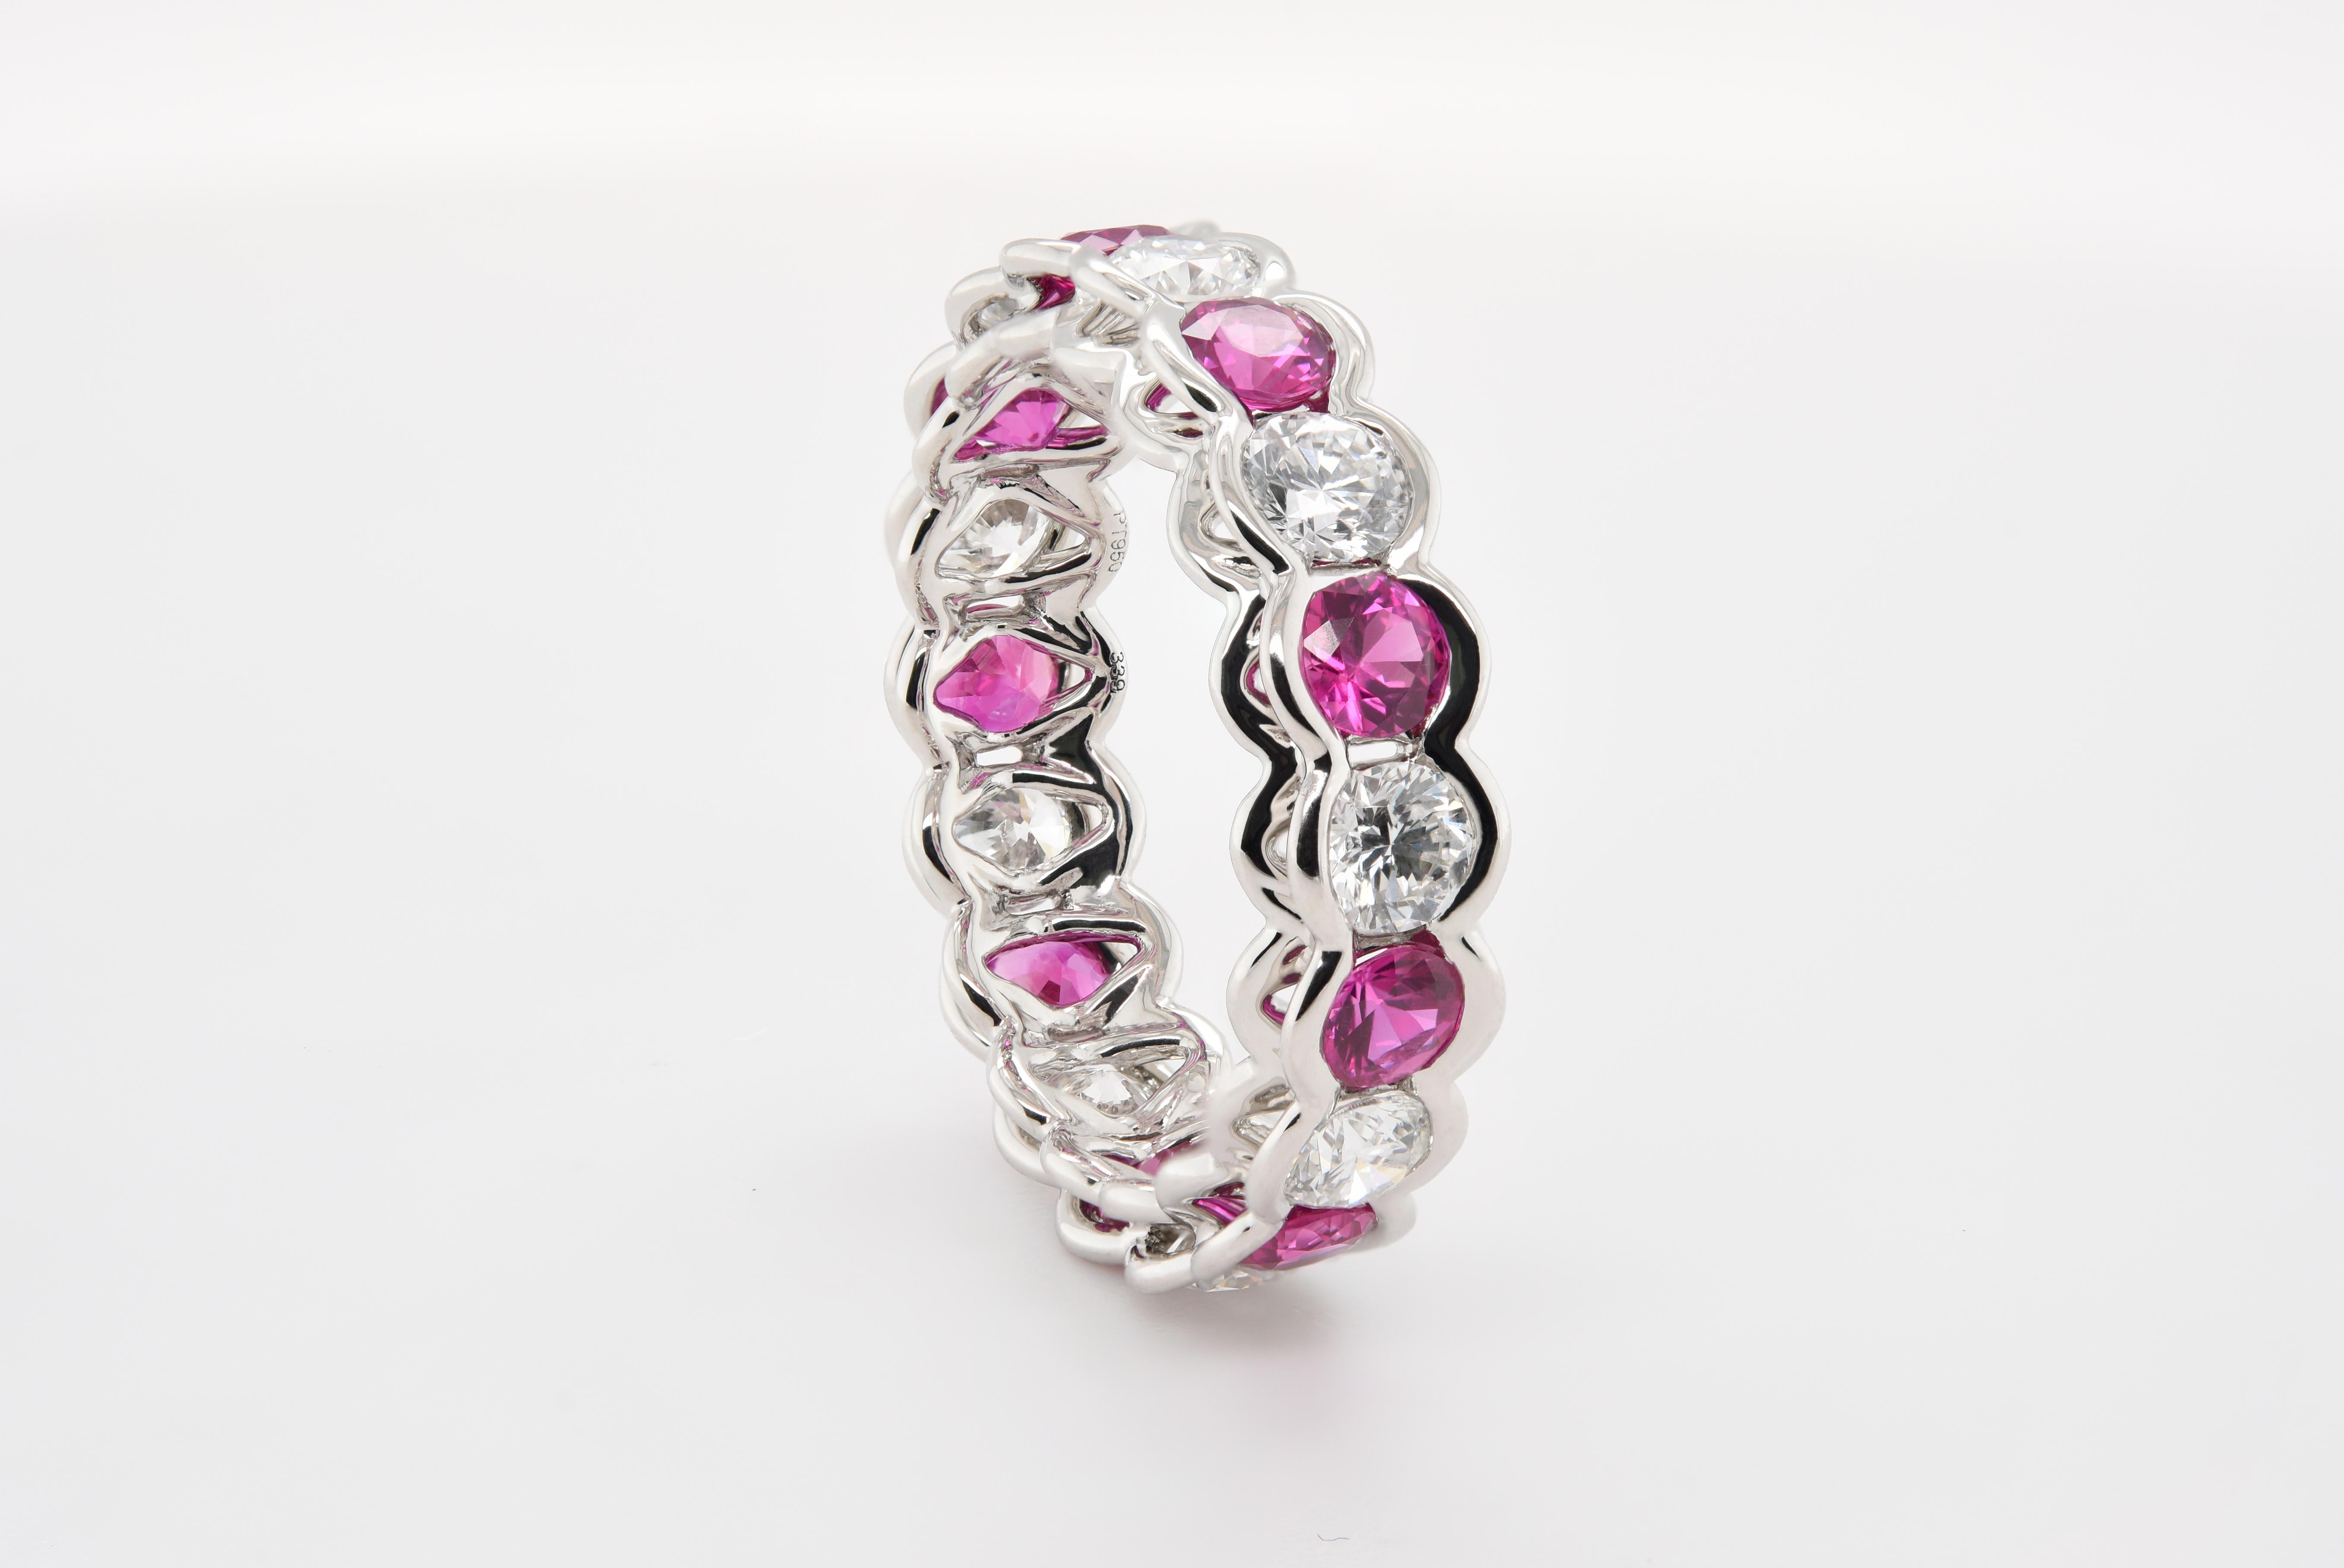 JAG New York created for you this Ruby and Diamond Eternity Band that is comprised of 2.50 carats total gemstone weight of rubies and diamond set in platinum.  

Unapologetic self-expression through jewelry. JAG New York's world class designs does